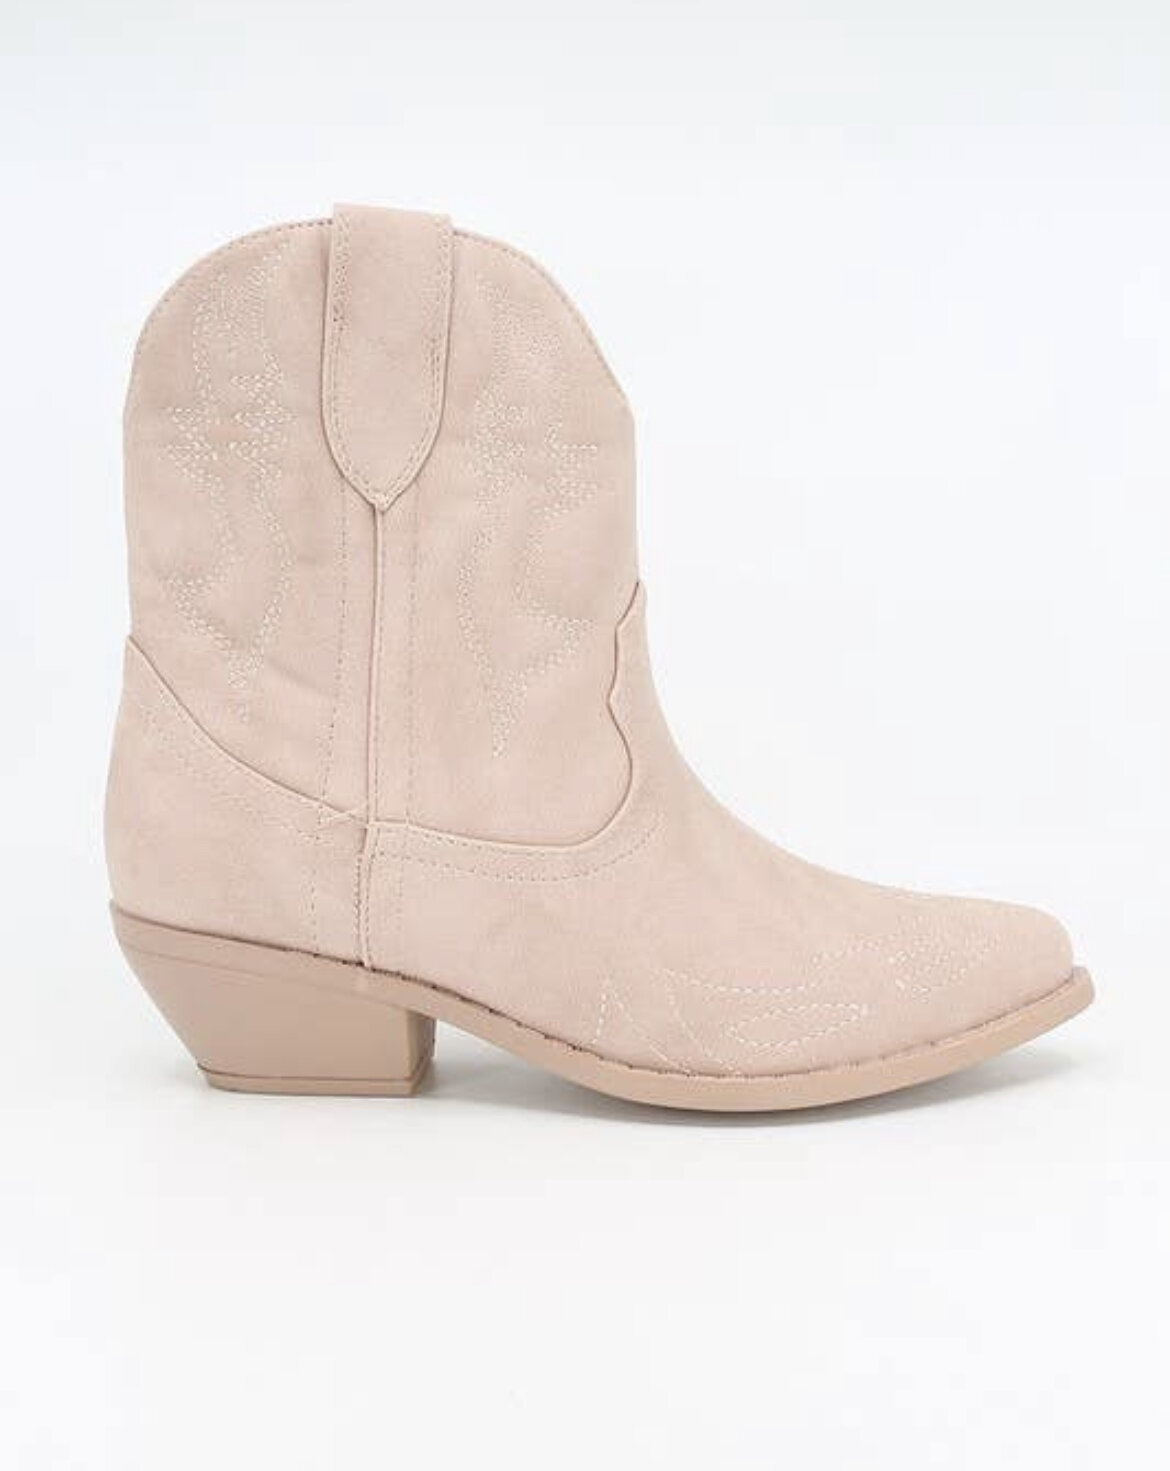 My Generation Blush Suede High Heel Mid-Calf Boots